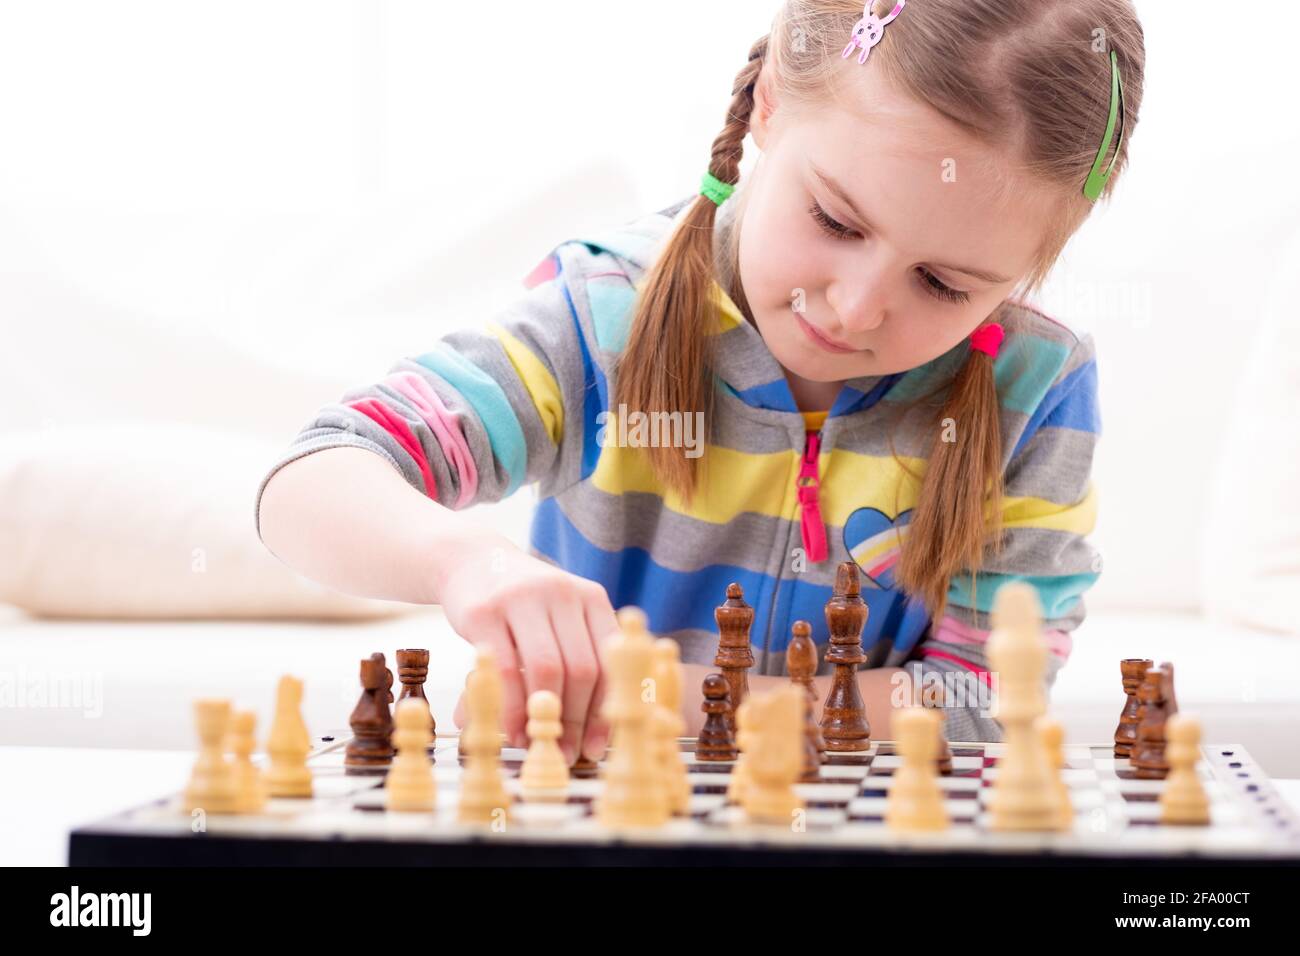 Chess Background. Play Chess Online. Playing Chess with Laptop. Remote  Online Education, Communication with Chess Coach, Family. Stock Image -  Image of family, issues: 199772003